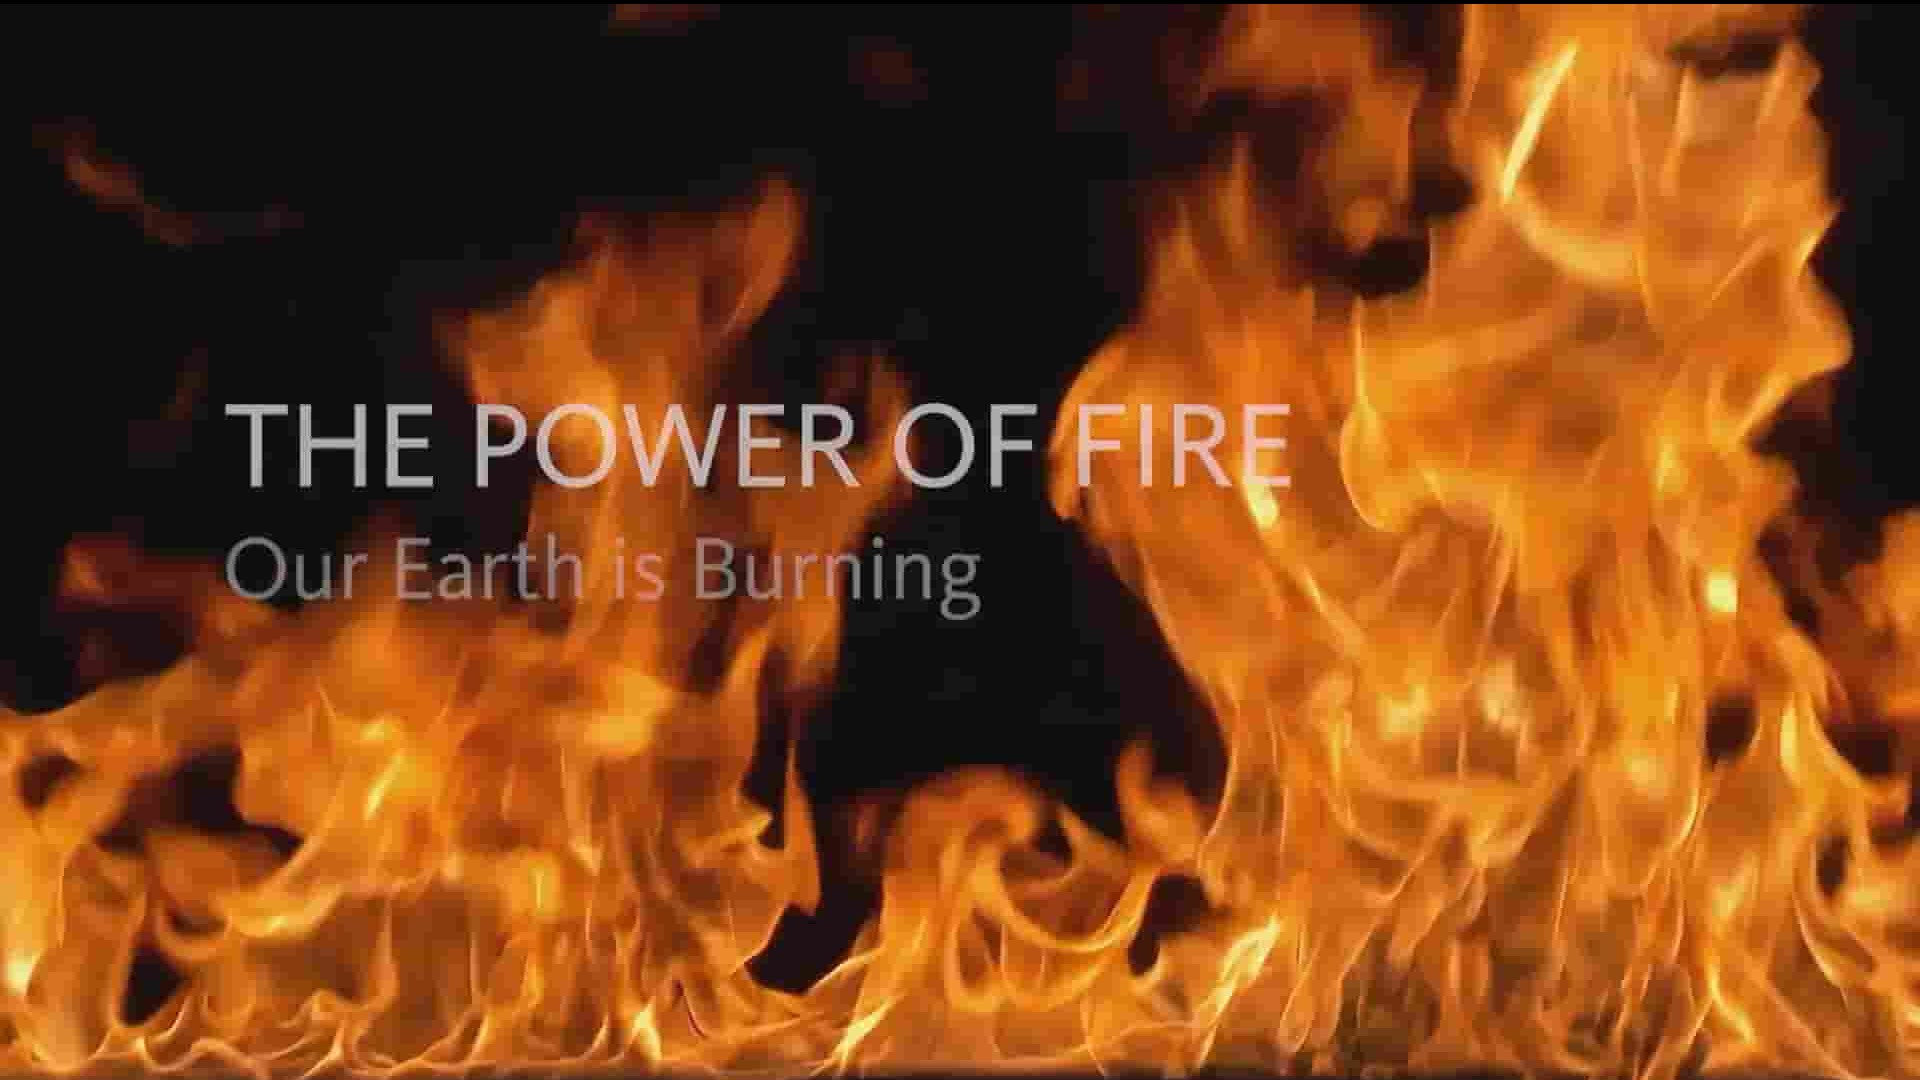 ZDF纪录片《火的力量：地球在燃烧 The Power of Fire: The Earth is Burning 2018》全1集 英语英字 1080P高清网盘下载